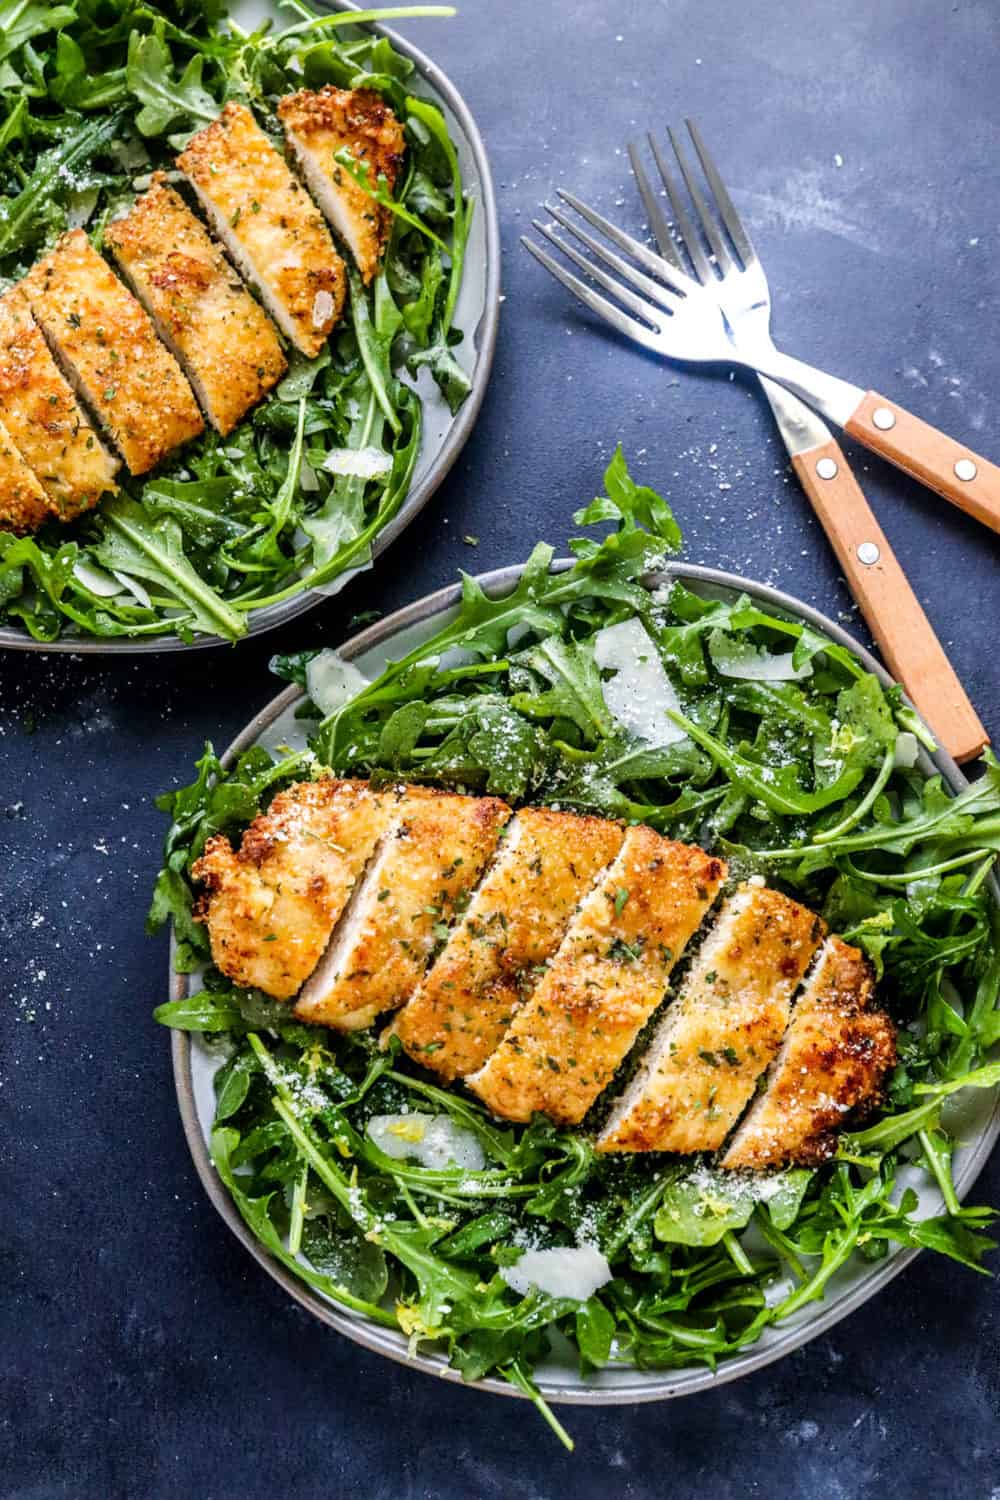 two grey plates filled with arugula salad topped with crispy breaded chicken breast